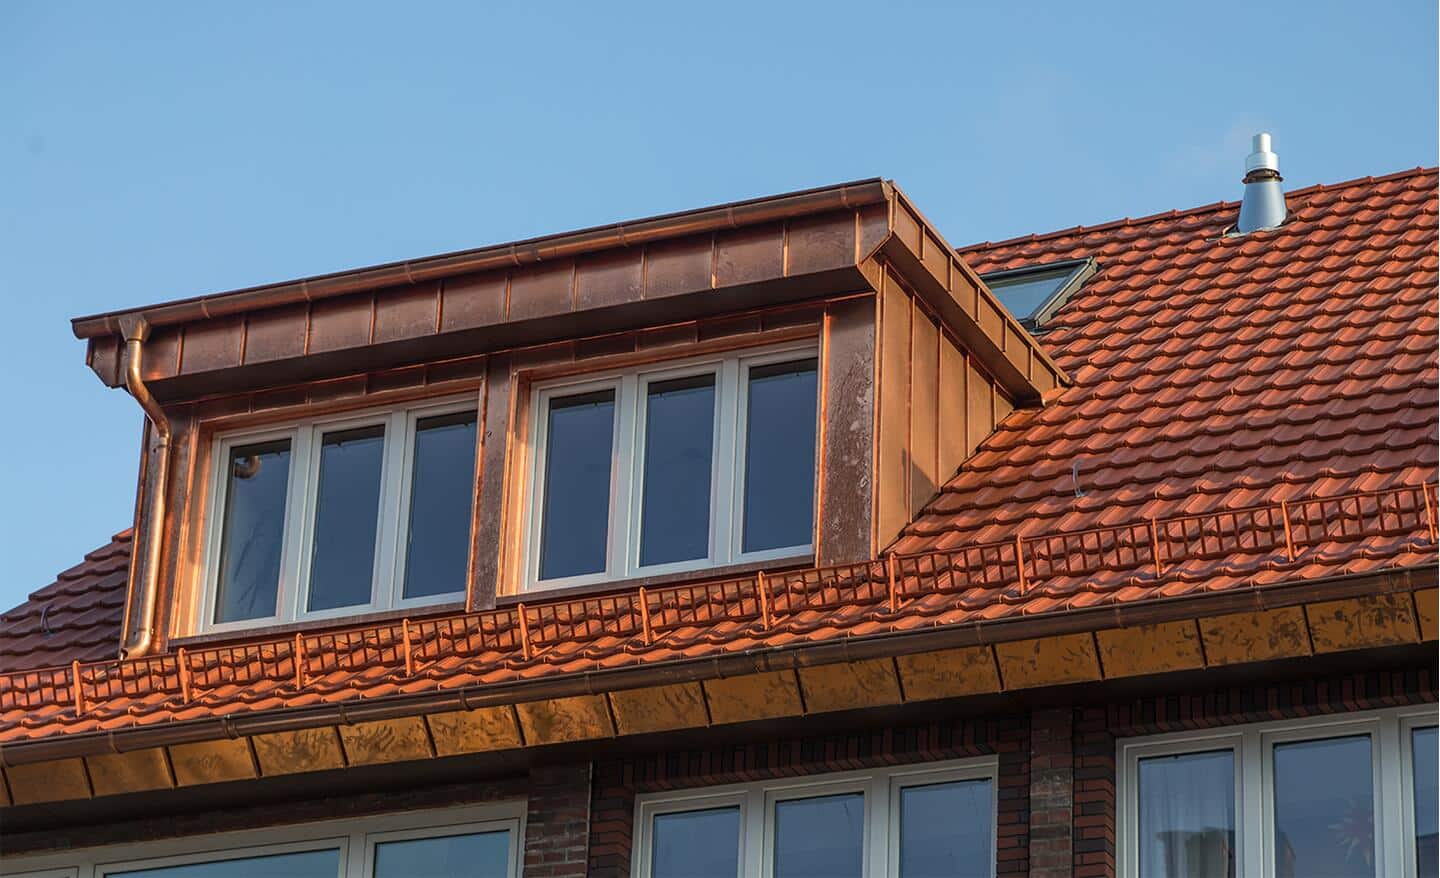 A home features a copper roof and attic windows.